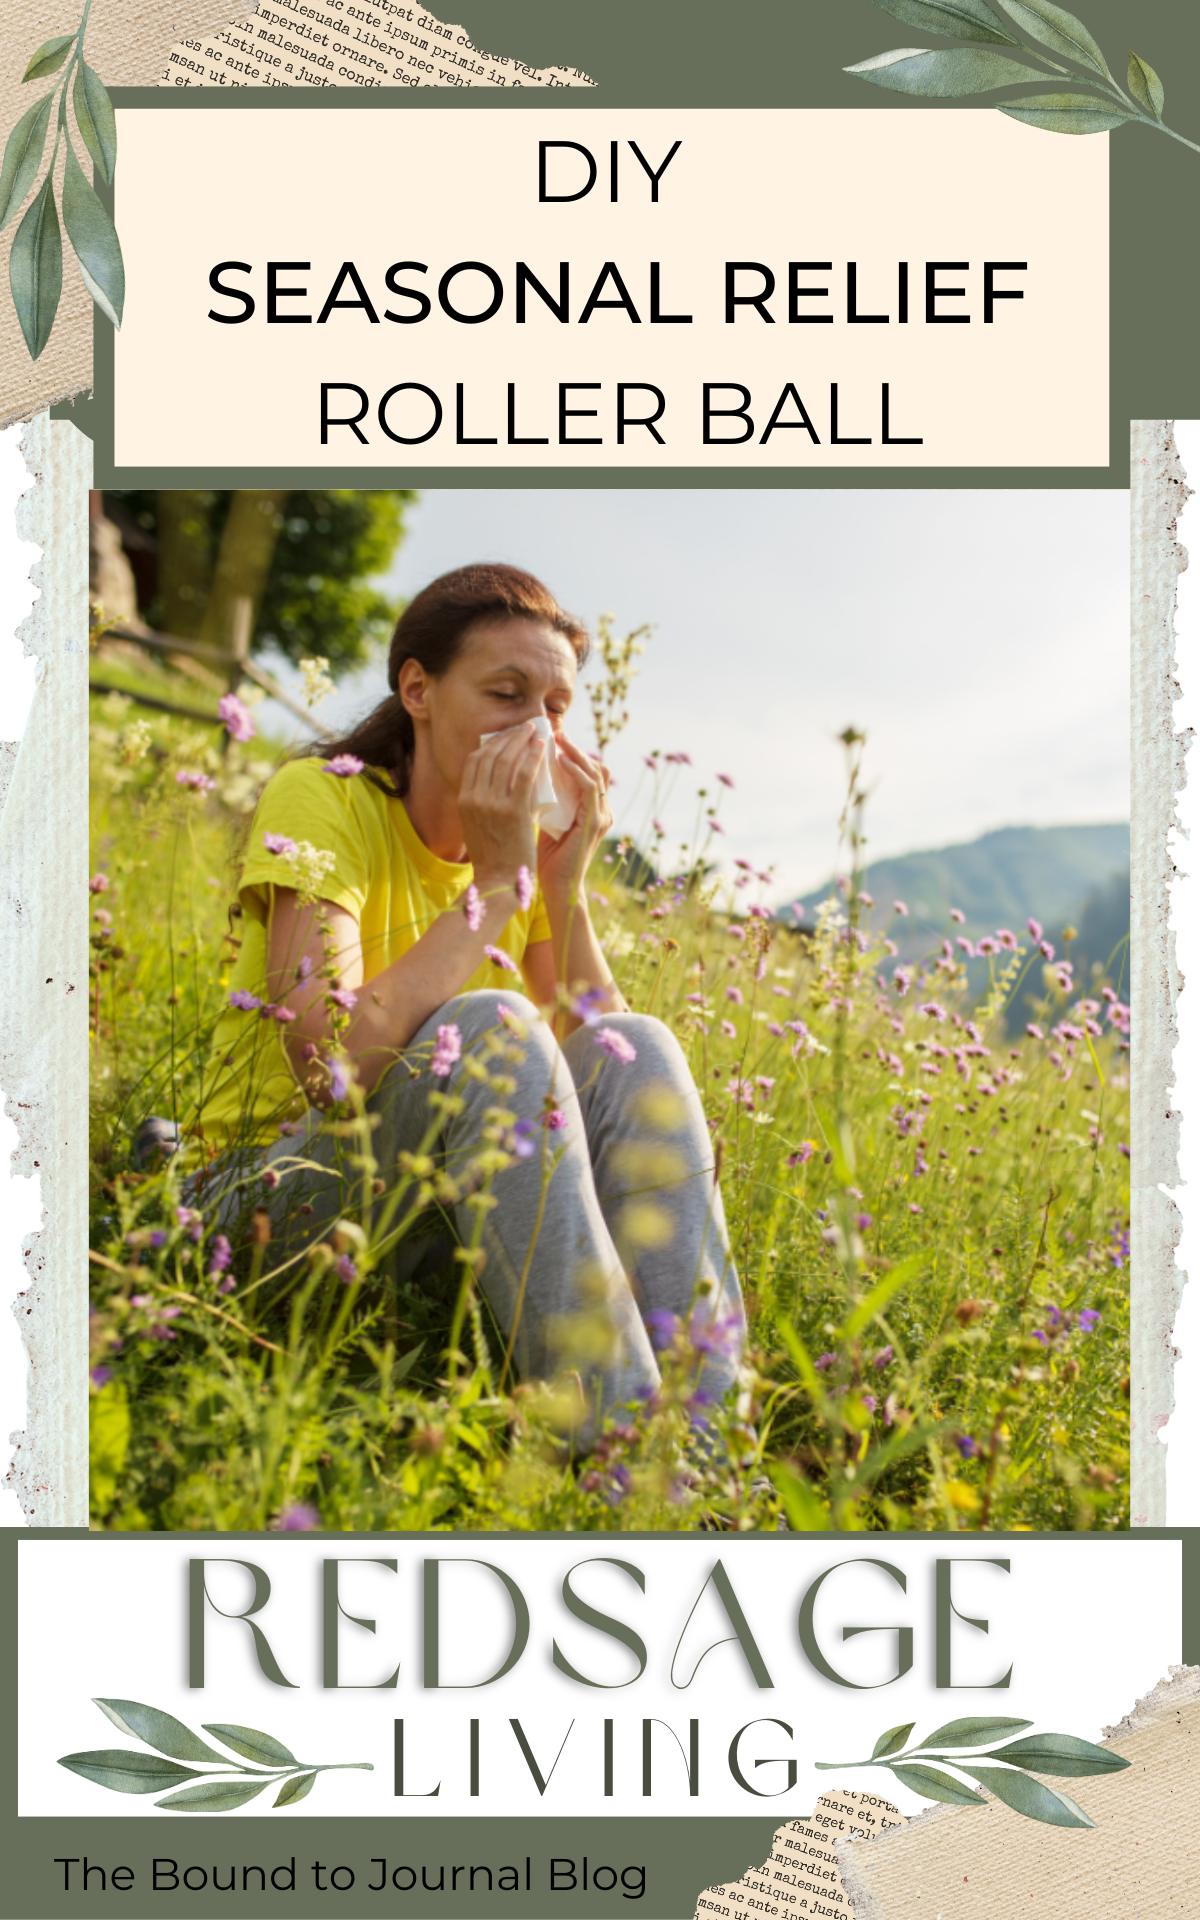 woman sitting on a hill of blooming weeds sneezing into a tissue with post title DIY seasonal relief rollerball